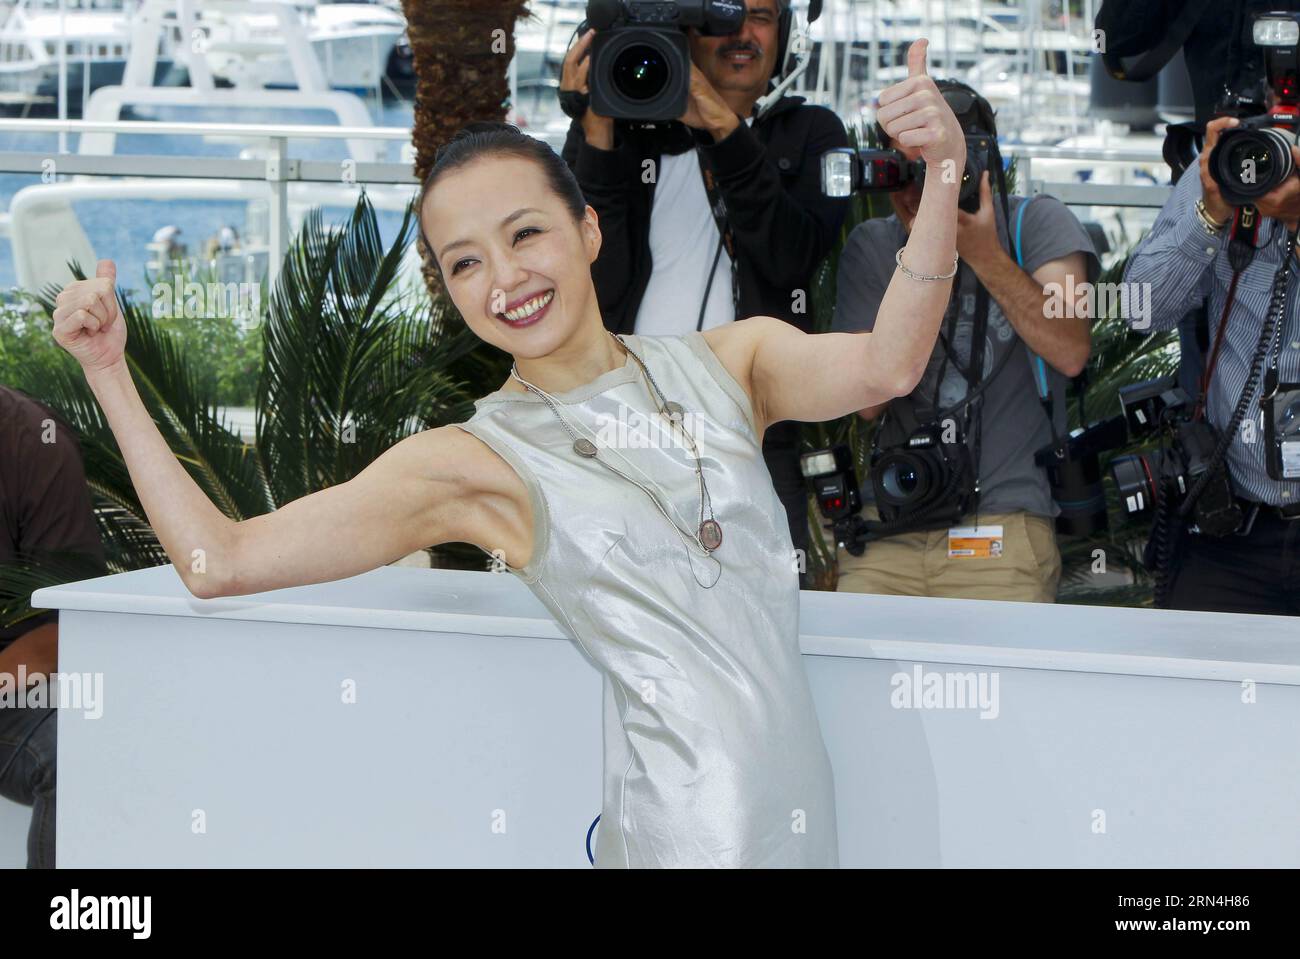 (150521) -- CANNES, May 21, 2015 -- Cast member of the film Nie Yinniang (the Assassin) Sheu Fang-Yi poses for photos at the photocall during the 68th Cannes Film Festival in Cannes, France, on May 21, 2015. The film Nie Yinniang (the Assassin) would premiere at the 68th Cannes Film Festival on Thursday. ) (zhf) FRANCE-CANNES-FILM FESTIVAL-THE ASSASSIN-PHOTOCALL ZhouxLei PUBLICATIONxNOTxINxCHN   150521 Cannes May 21 2015 Cast member of The Film never Yinniang The Assassin Sheu Fang Yi Poses for Photos AT The photo call during The 68th Cannes Film Festival in Cannes France ON May 21 2015 The Fi Stock Photo